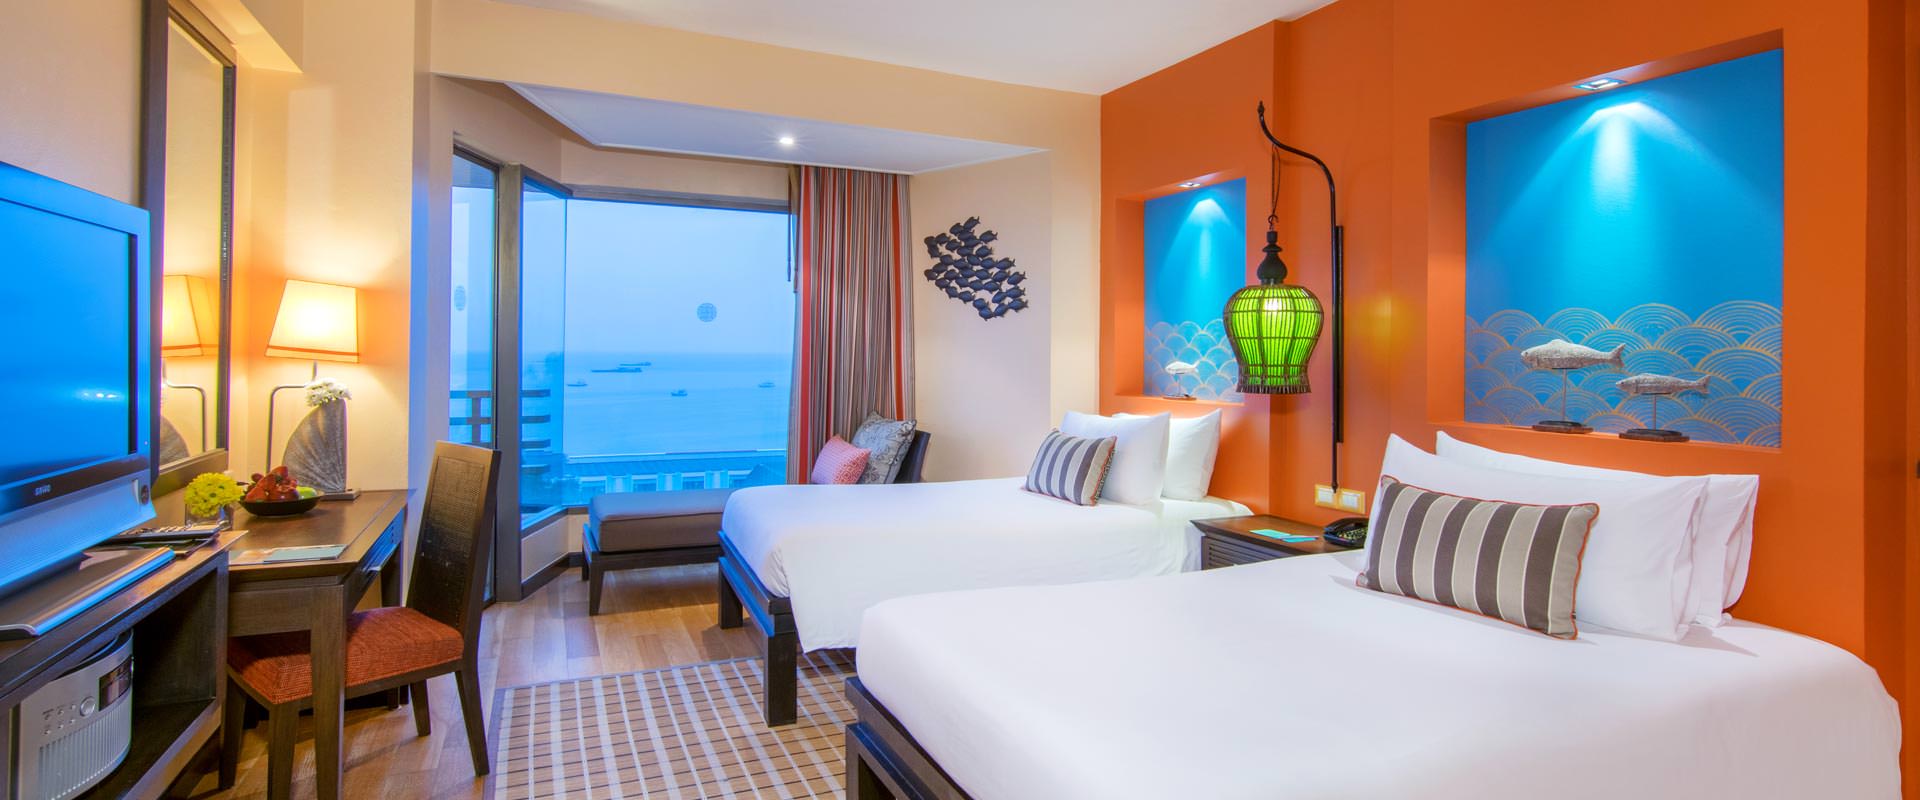 Deluxe Sea View Room at The Bayview Hotel Pattaya